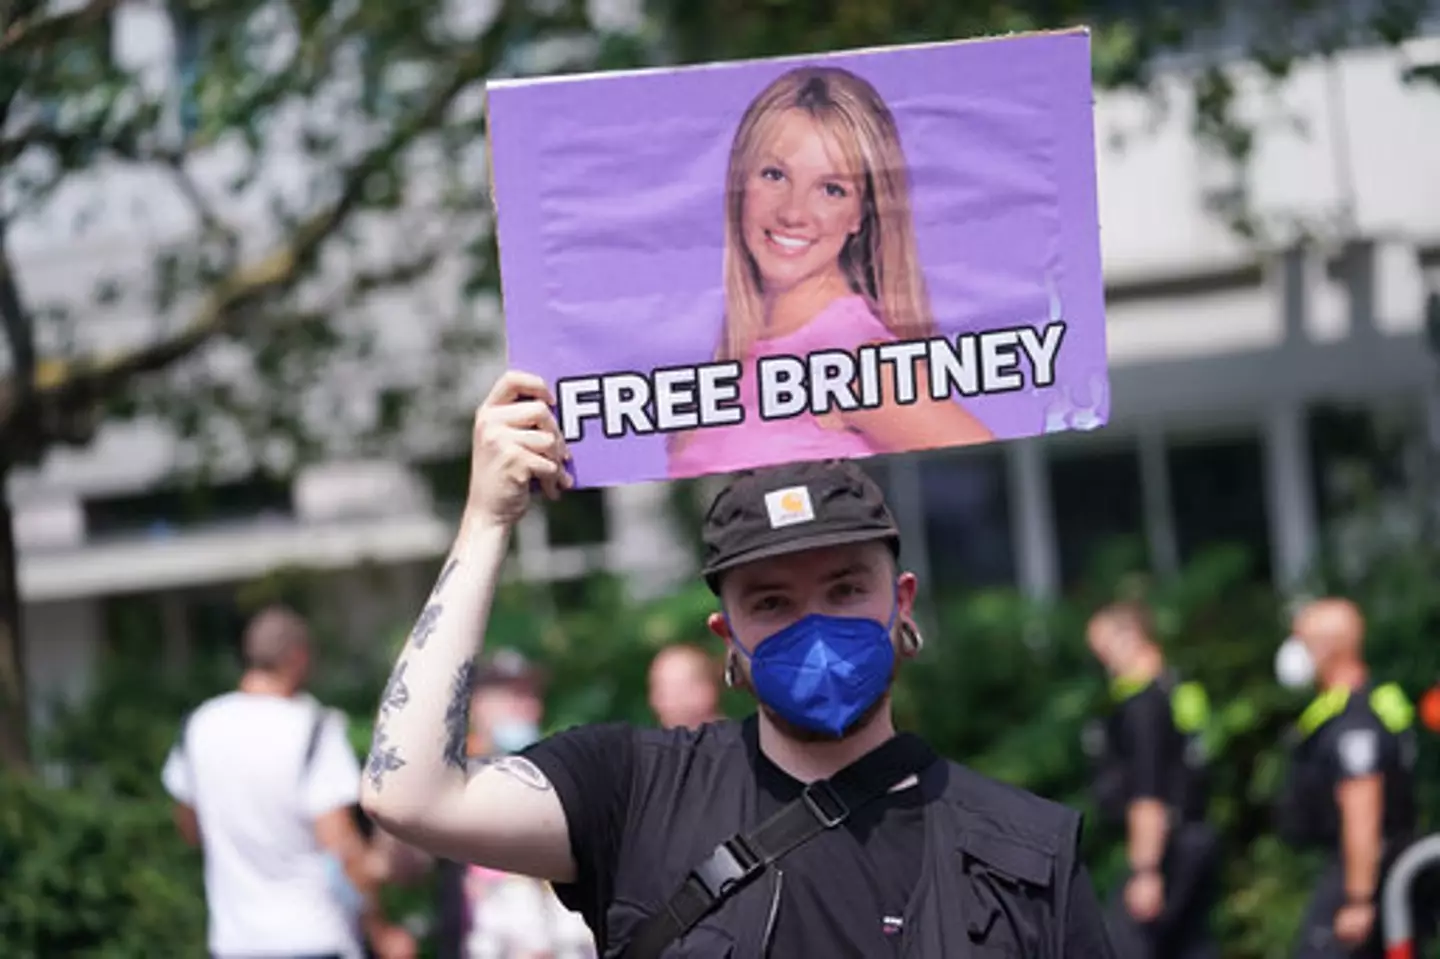 The FreeBritney movement garnered traction earlier this year (